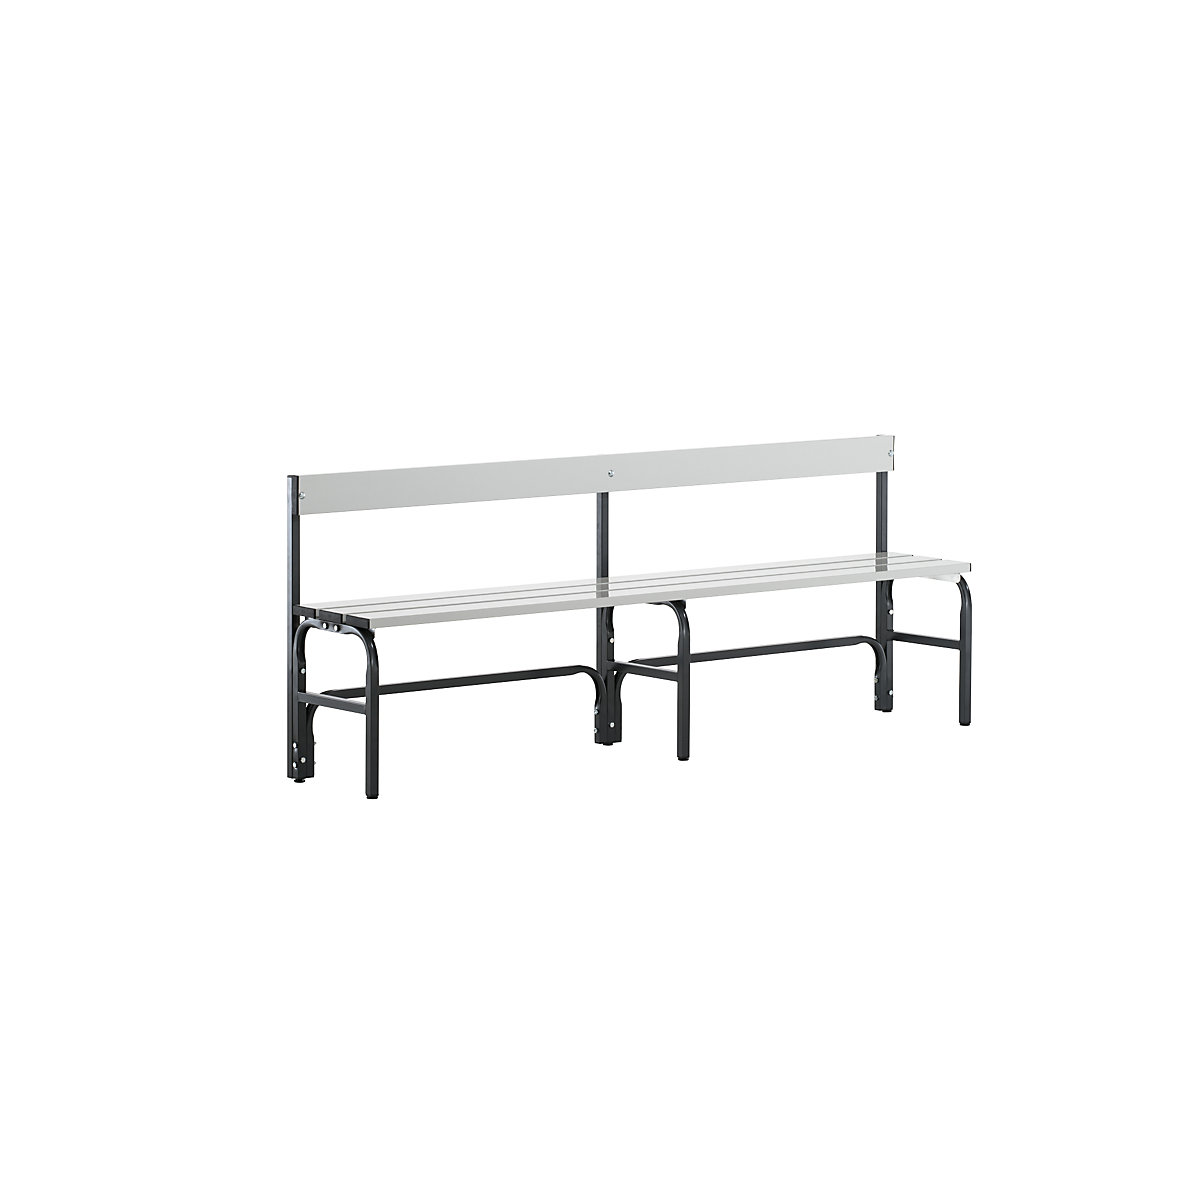 Sypro – Half height cloakroom bench with back rest, single-sided, aluminium, length 1500 mm, charcoal